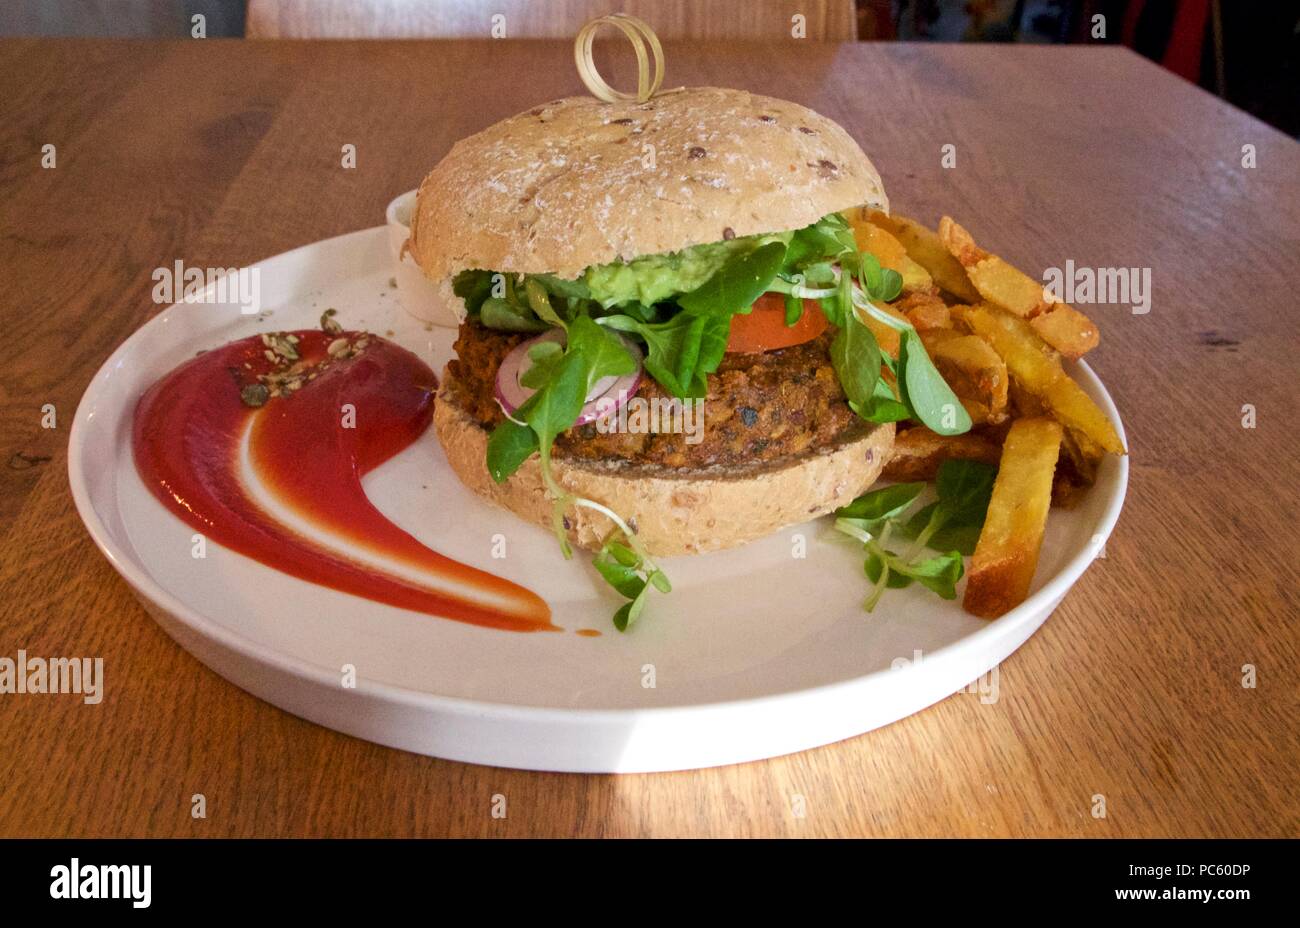 A meat-free, vegan meal of potato fries, ketchup and a seitan burger on a white plate Stock Photo